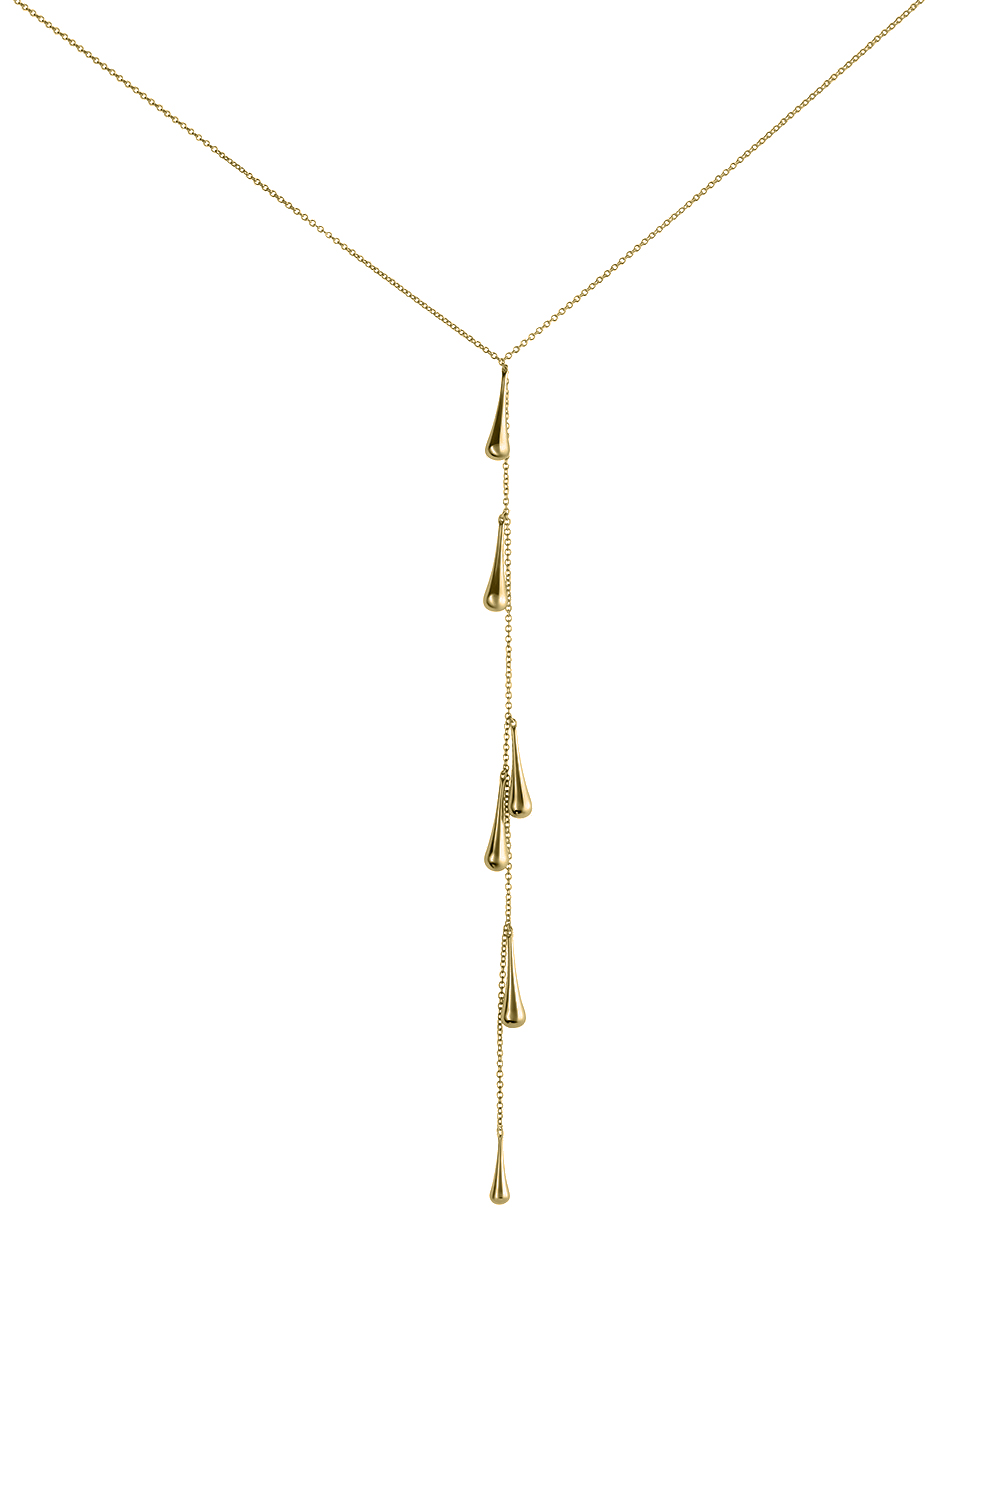 FALLING DROPS NECKLACE YELLOW GOLD PLATED  